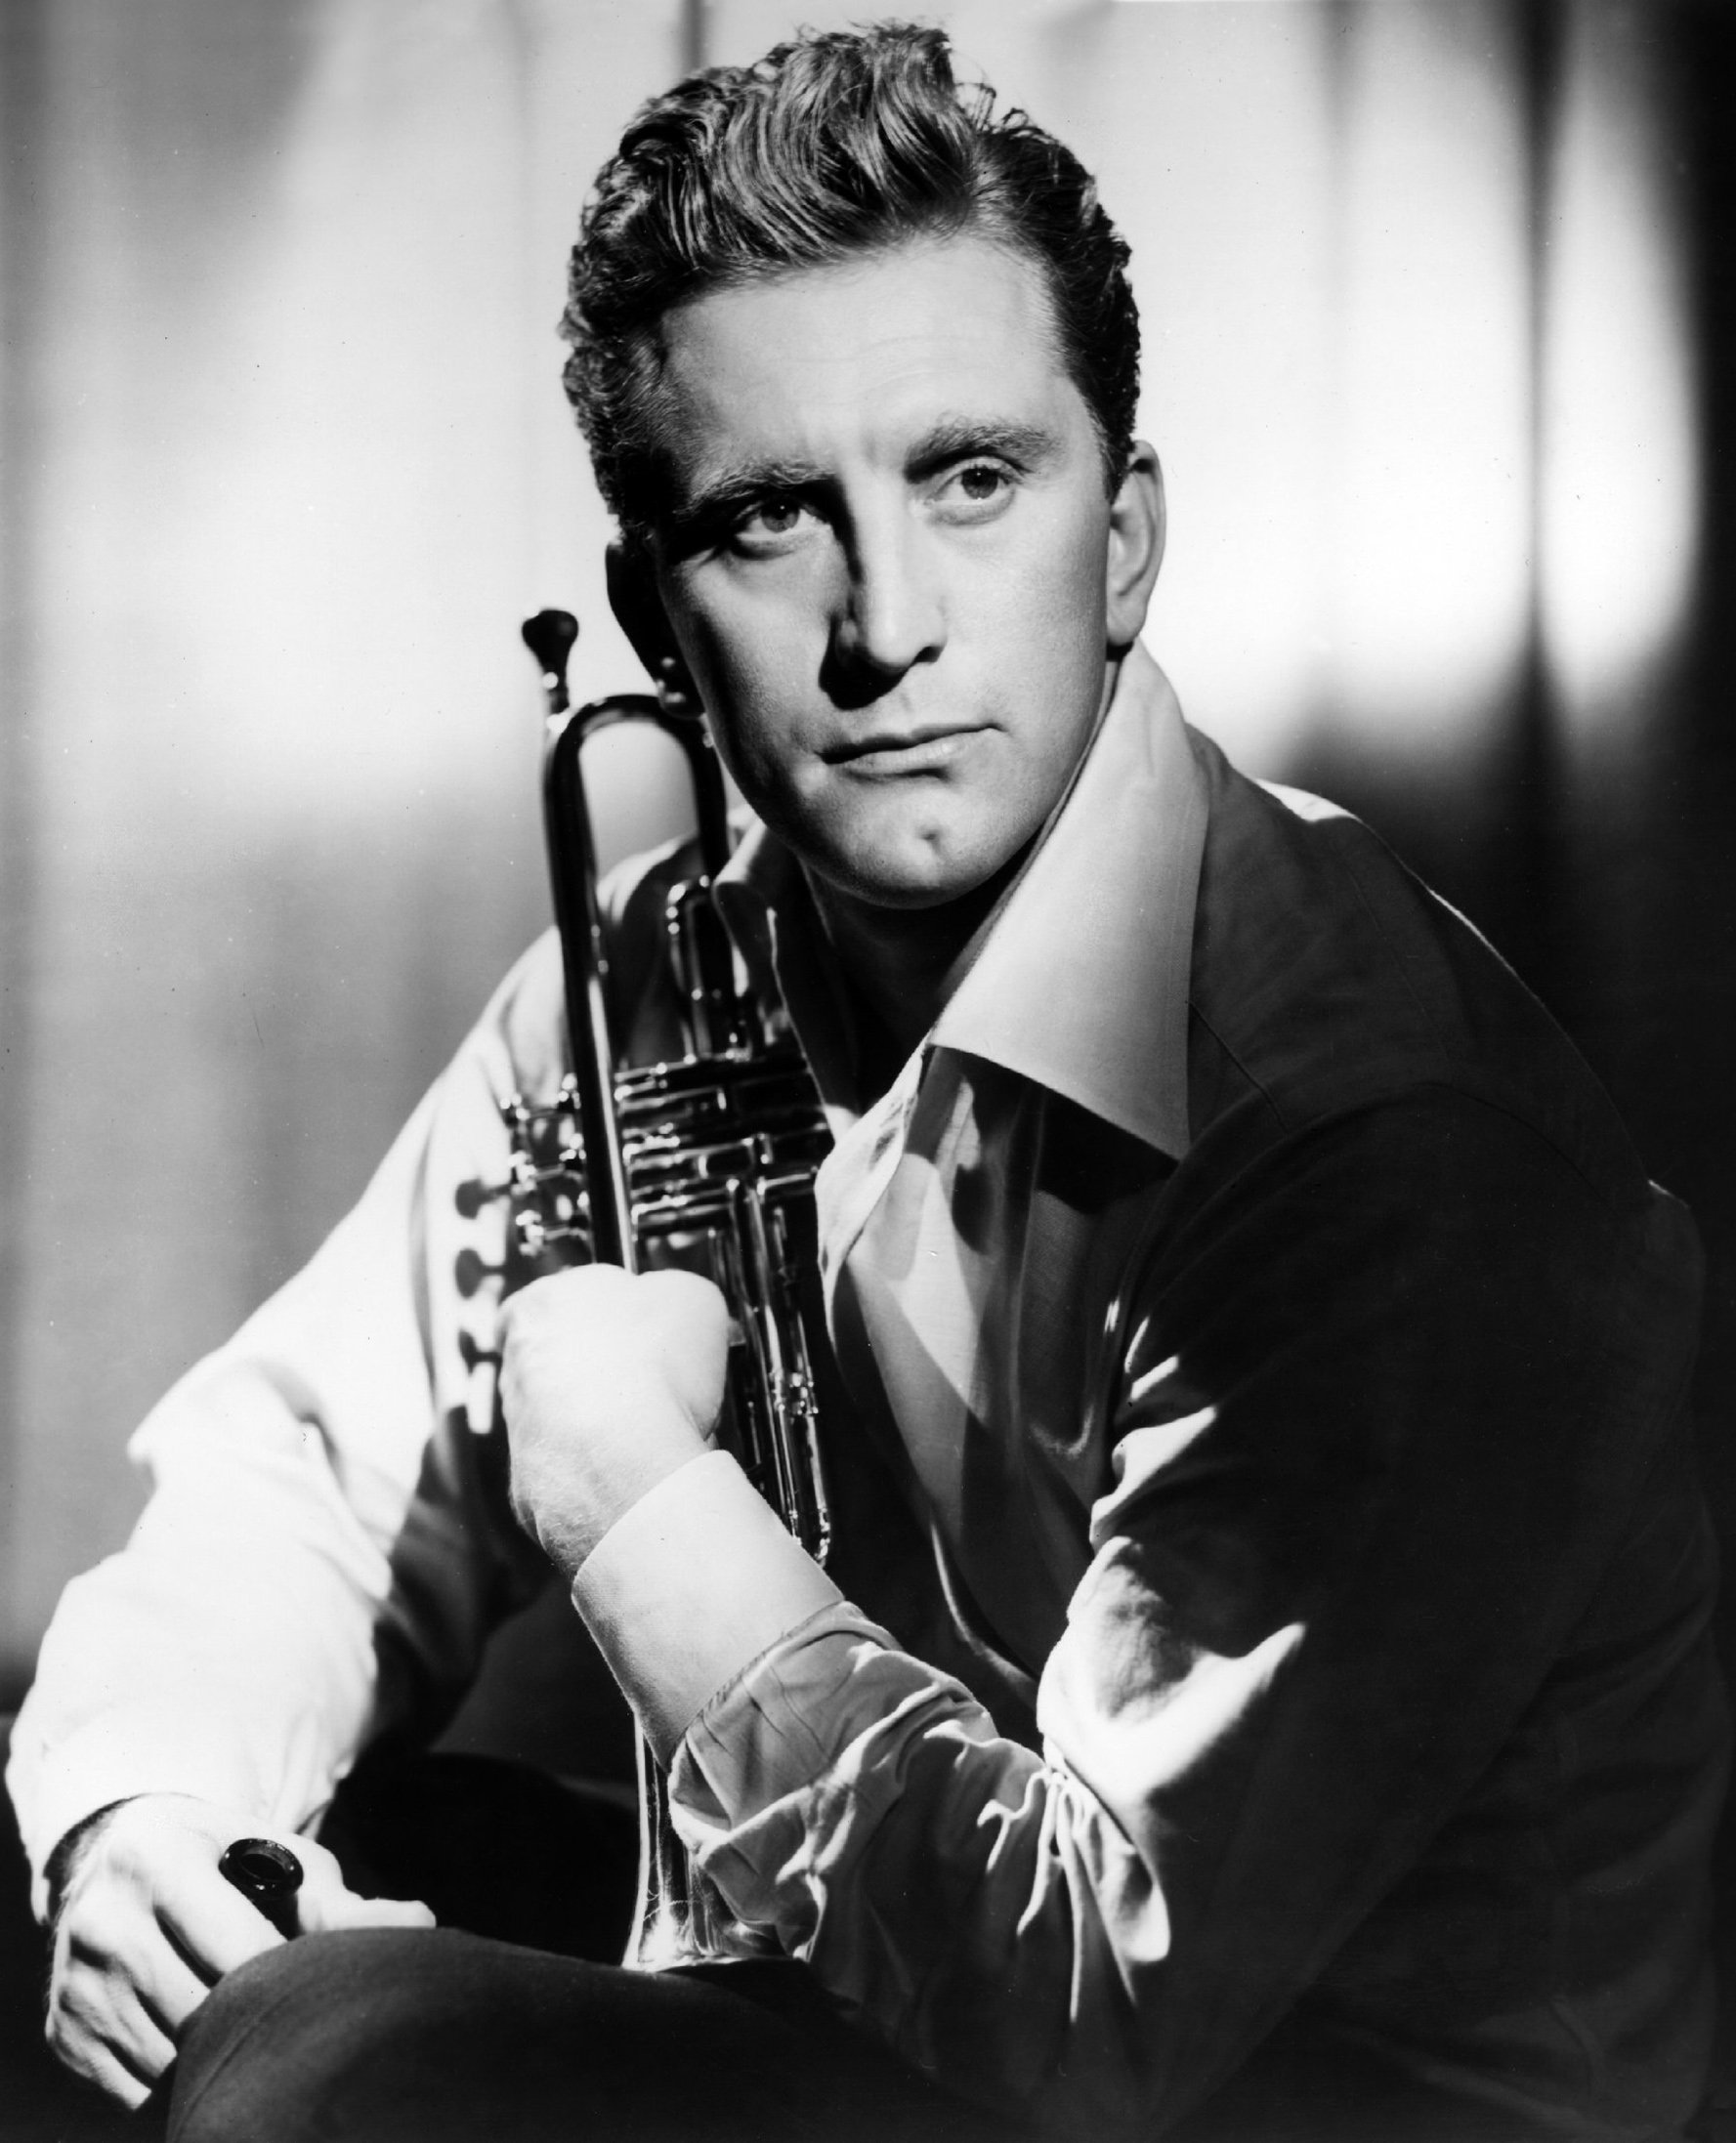 Kirk Douglas as Rick Martin holding a trumpet in the 1949 musical drama "Young Man with a Horn."  / Source: Getty Images